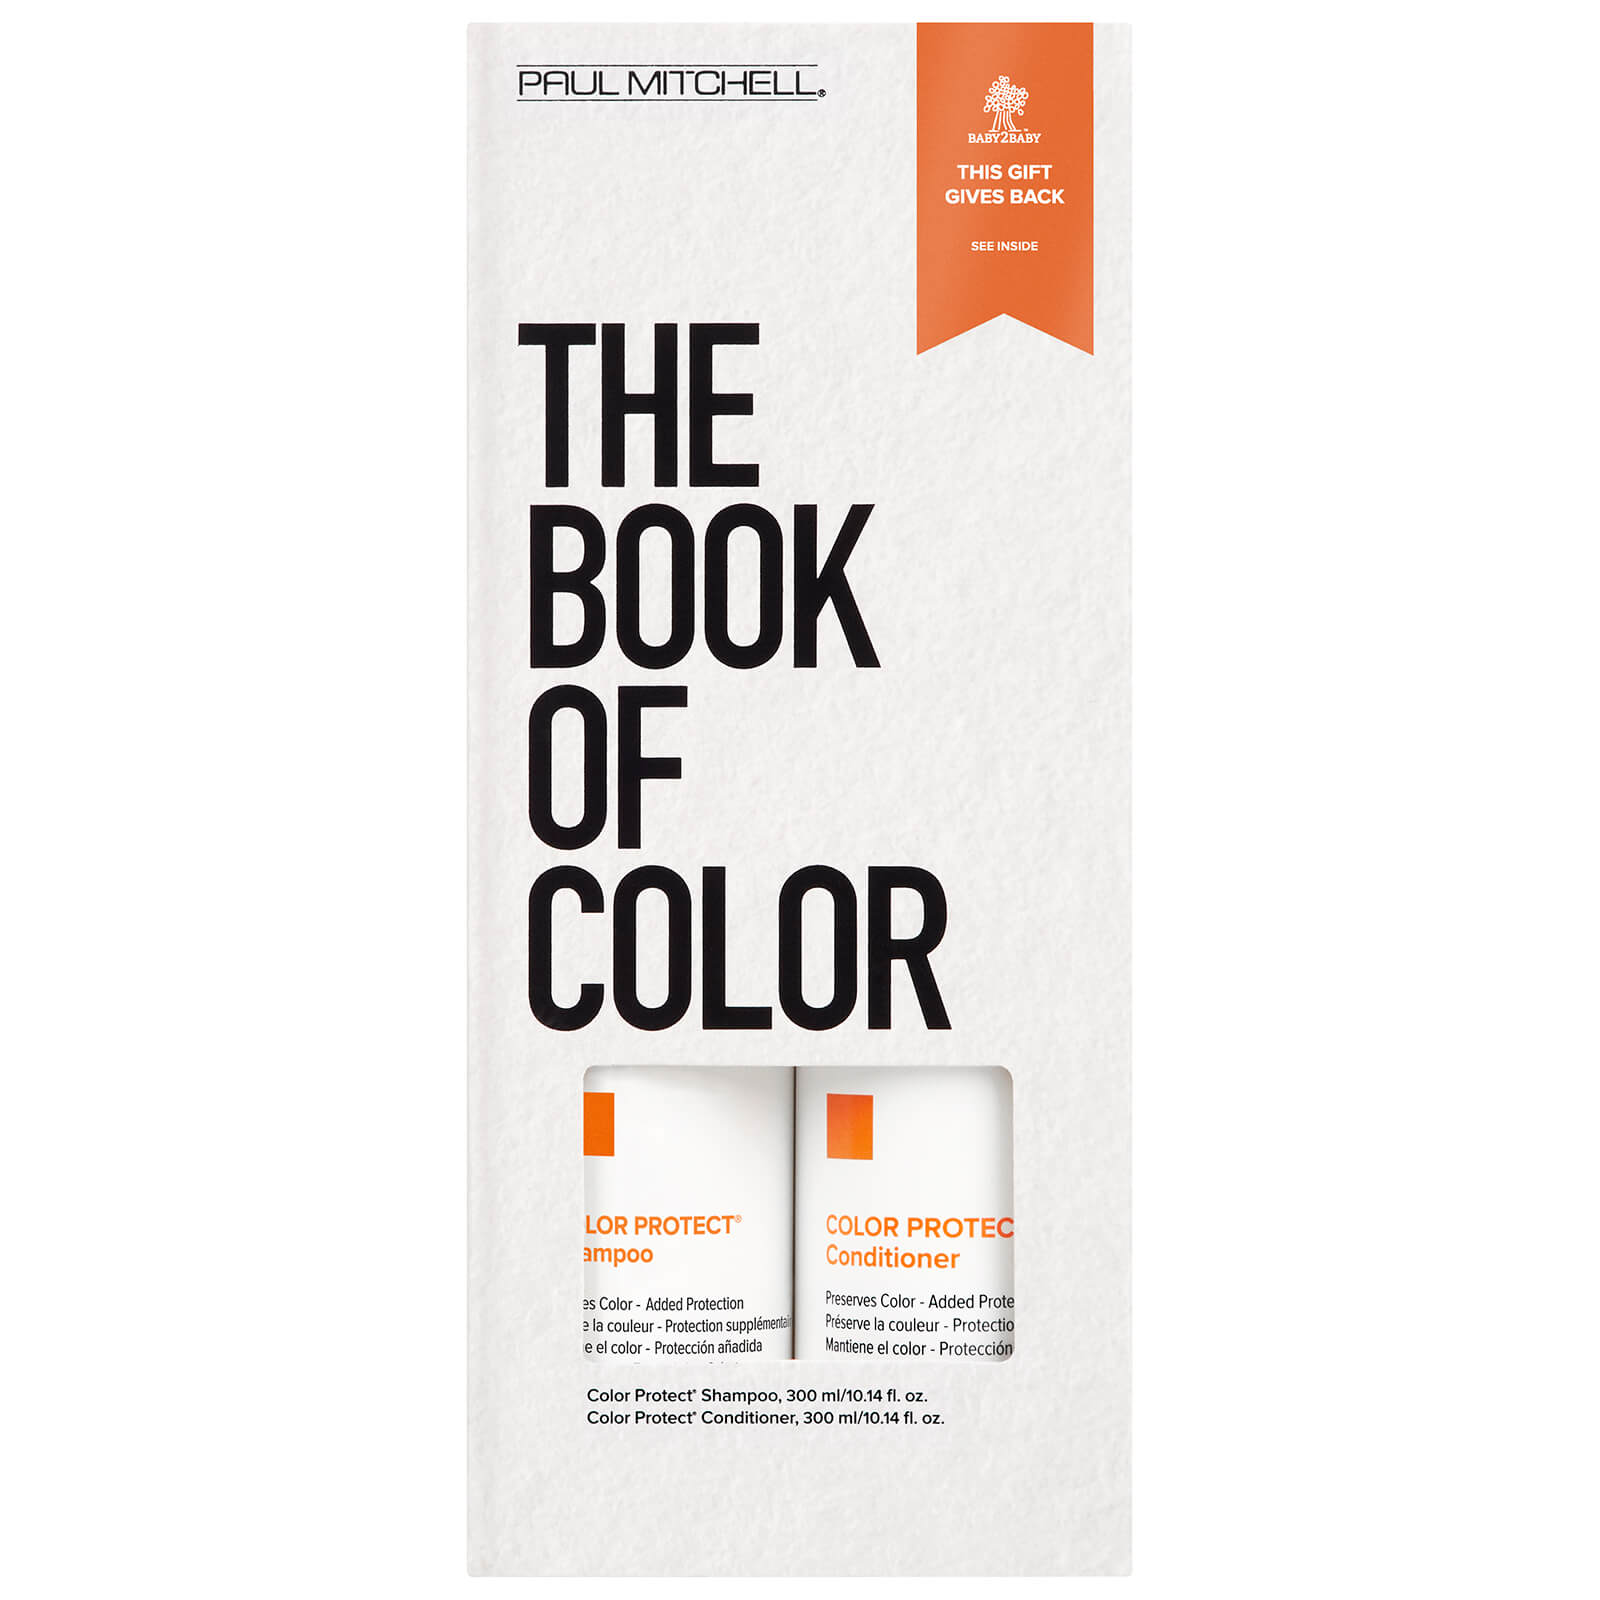 Paul Mitchell Colour Protect Gift Set